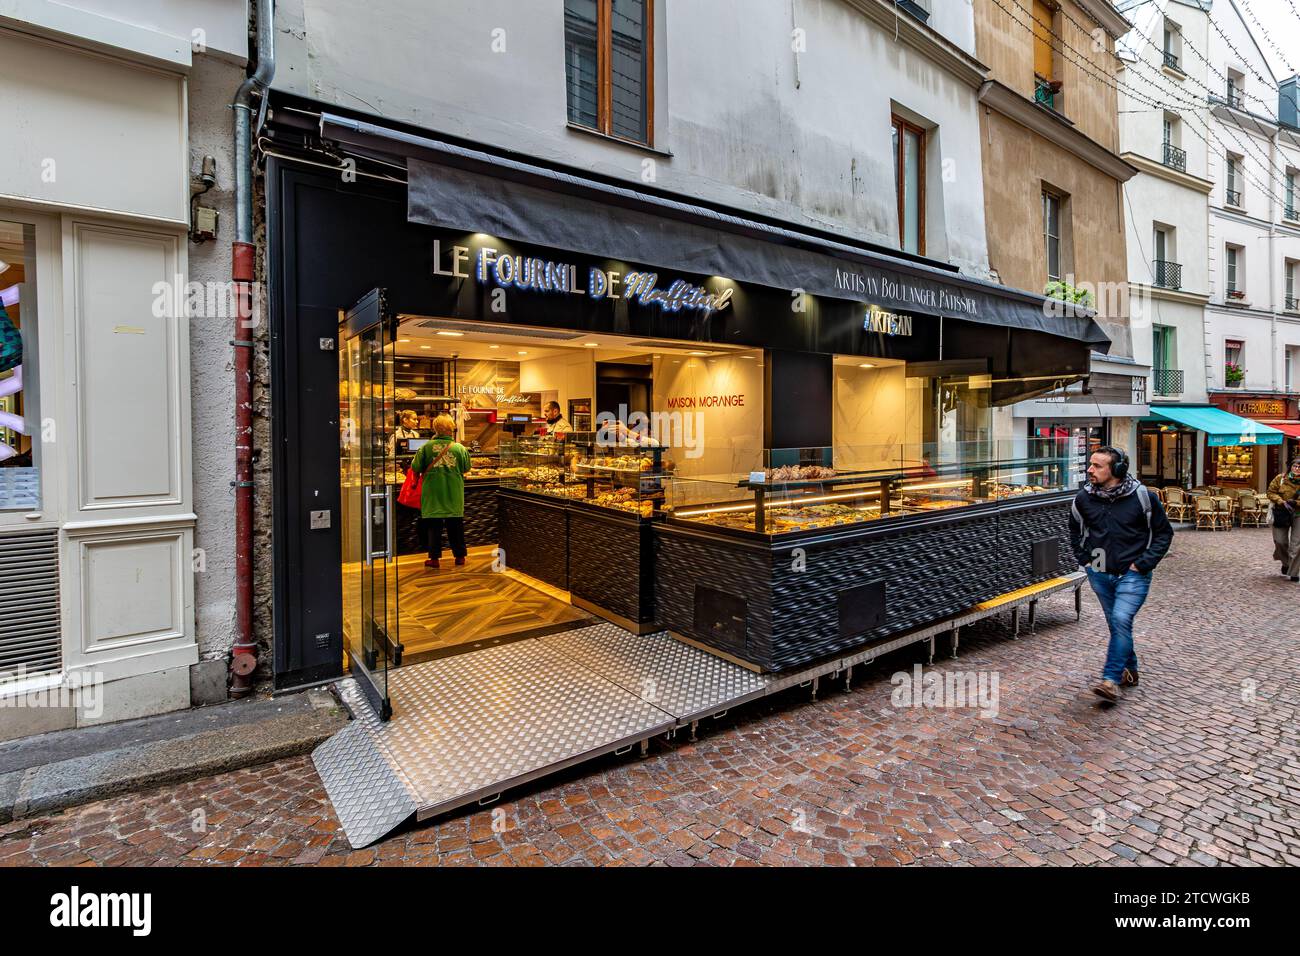 People shopping at Le Fournil de Mouffetard a Boulangerie Pâtisserie on Rue Mouffetard in the 5th arrondissement of Paris, France Stock Photo